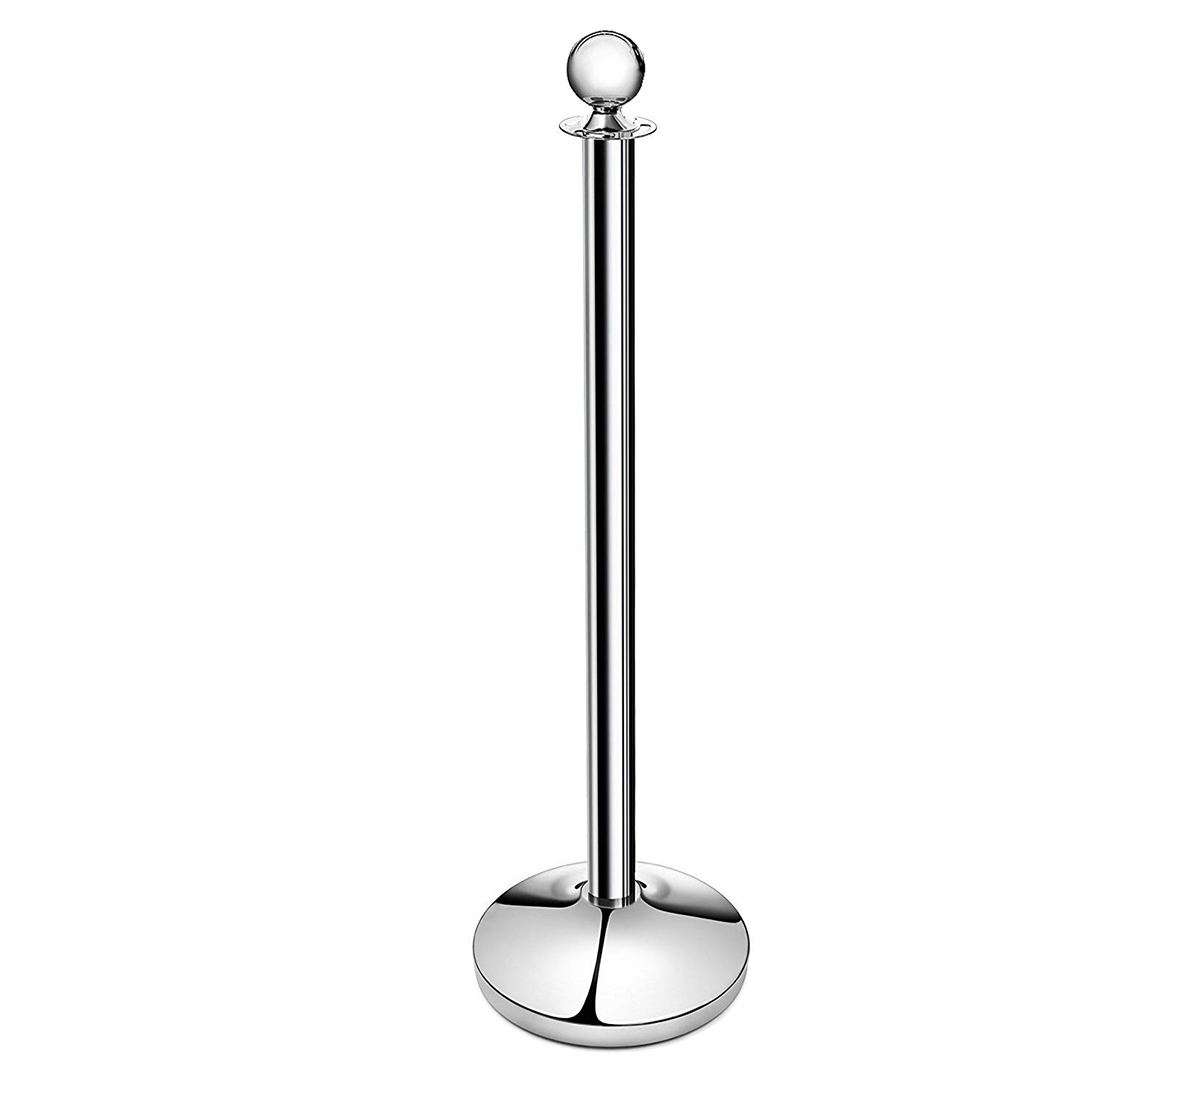 Silver Stainless Steel Queue Manager 1000 MM